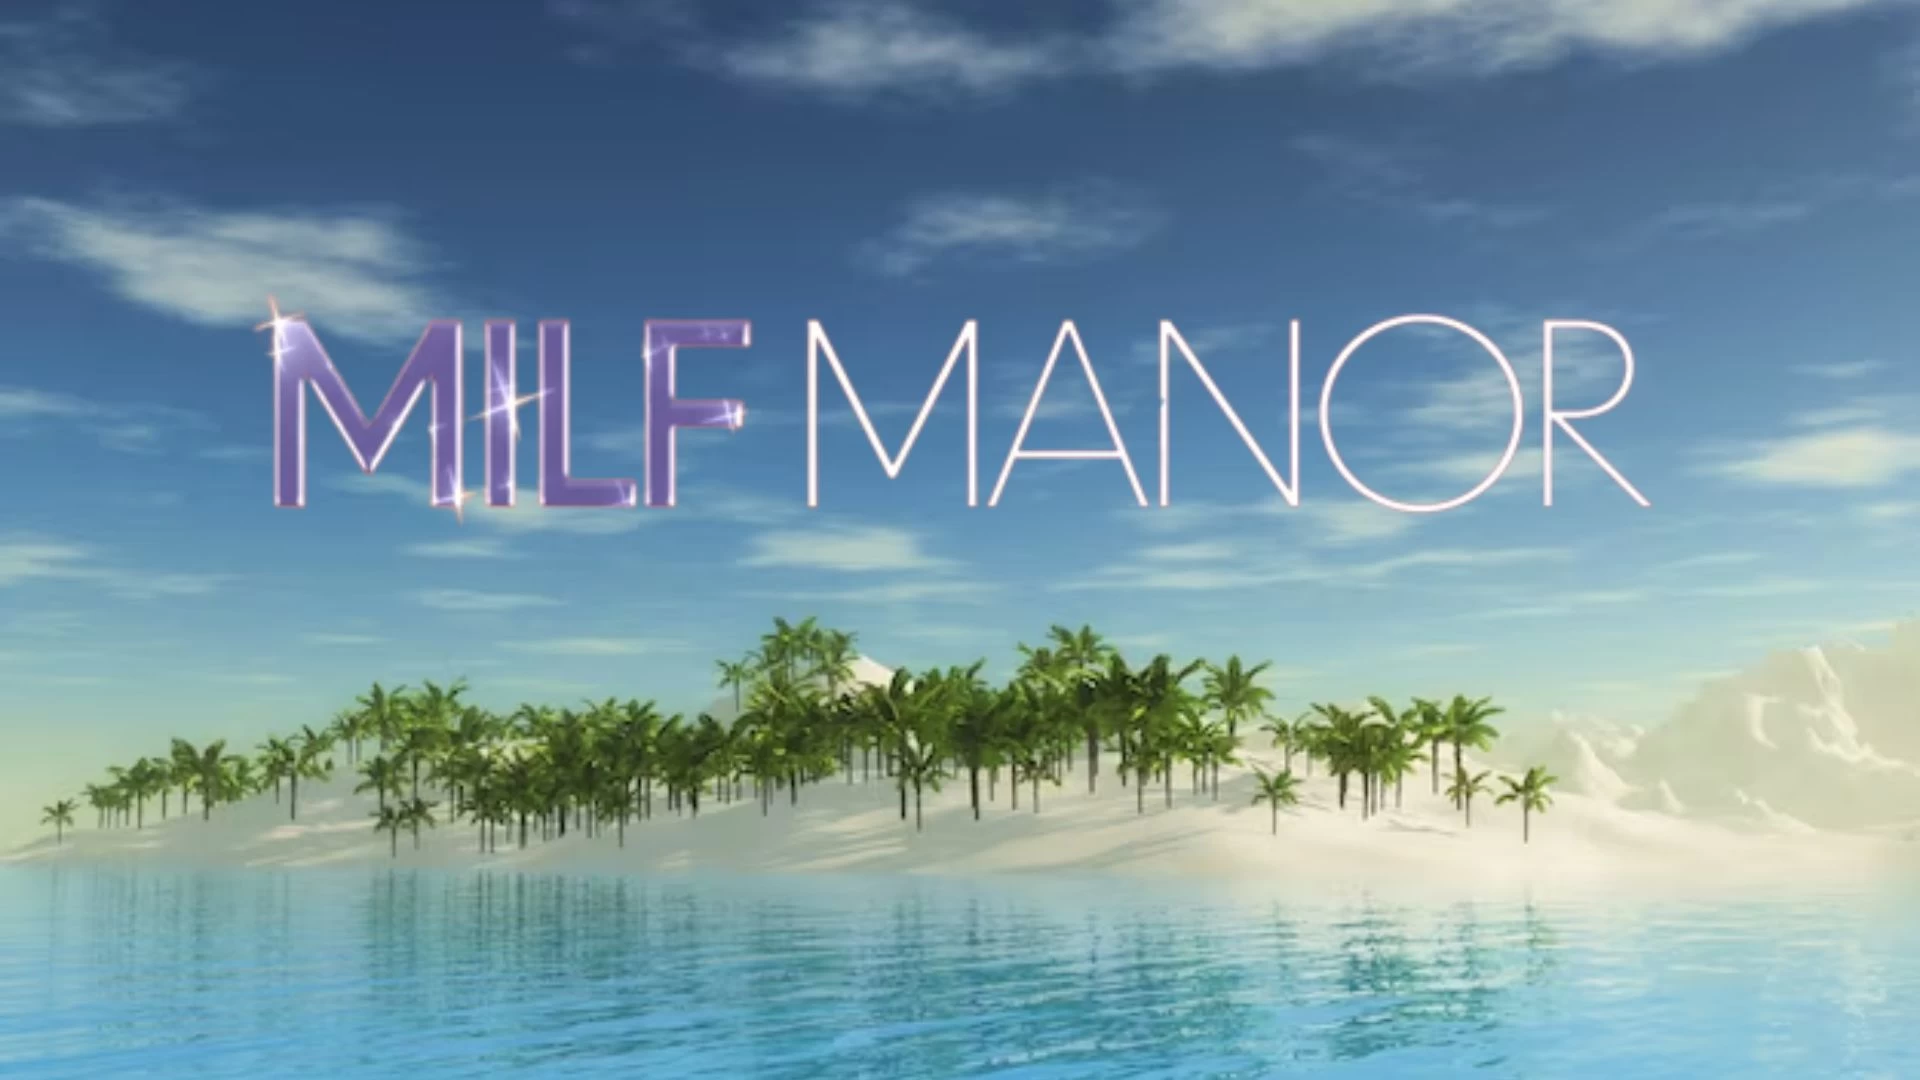 MILF Manor Where Are They Now? What Channel is MILF Manor on?